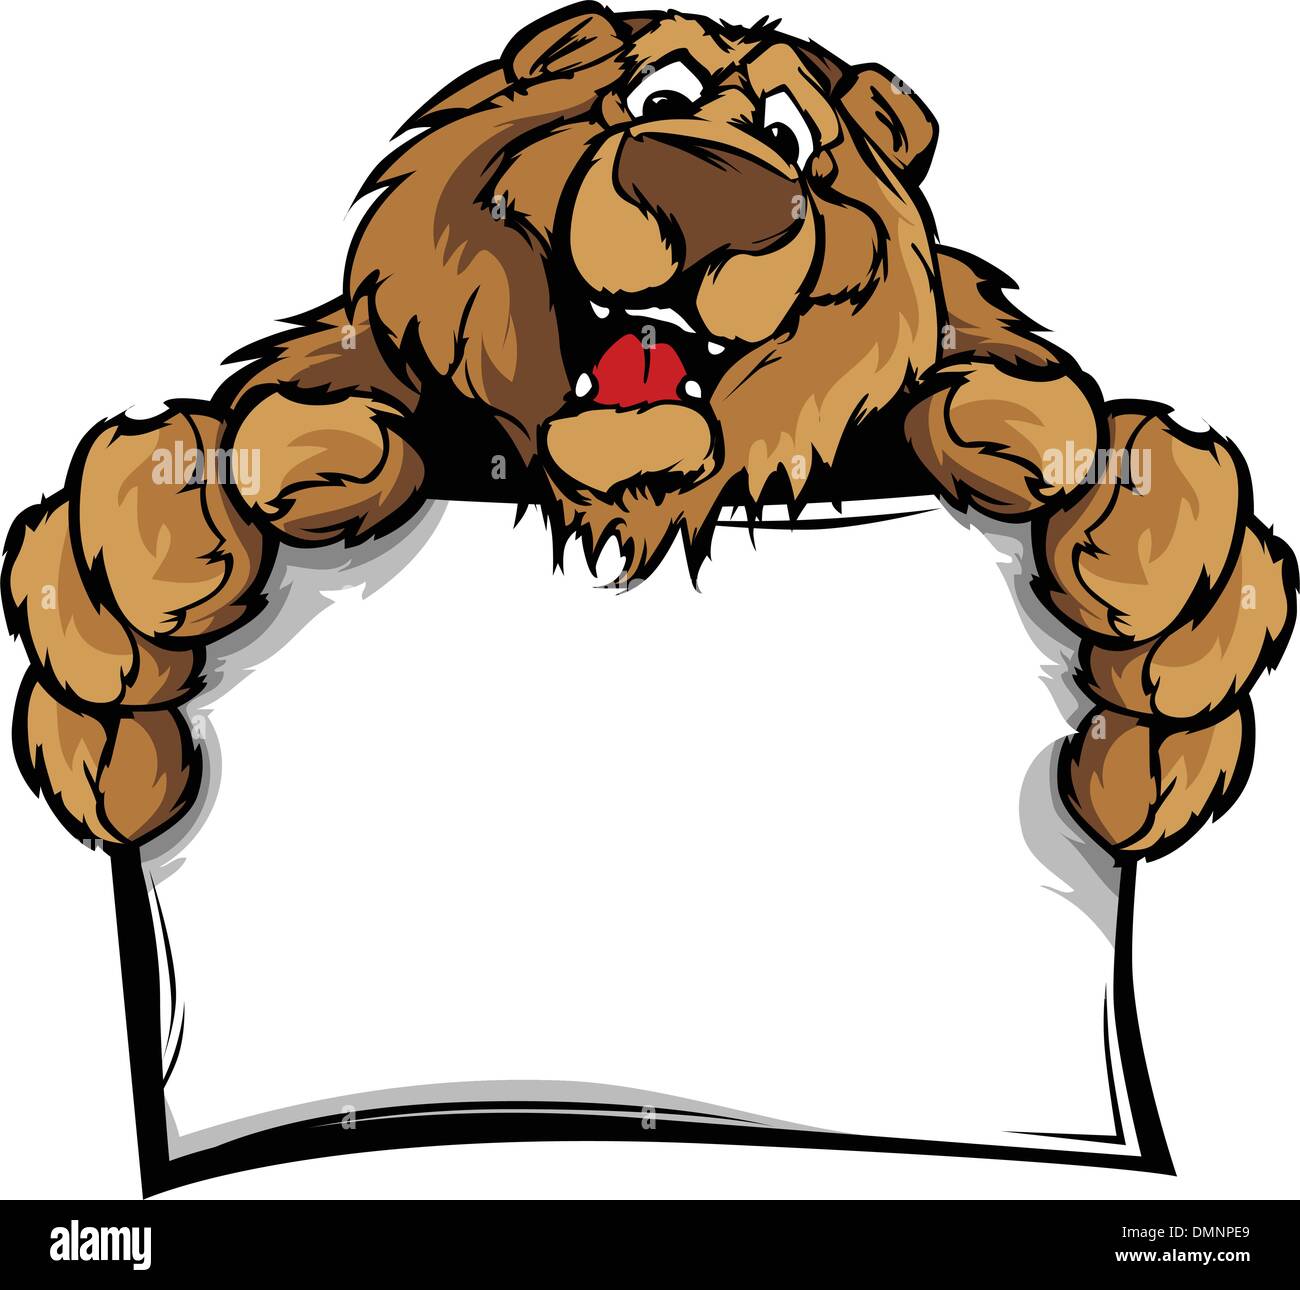 Graphic Vector Image of a Happy Cute Bear Mascot Holding Sign Stock Vector